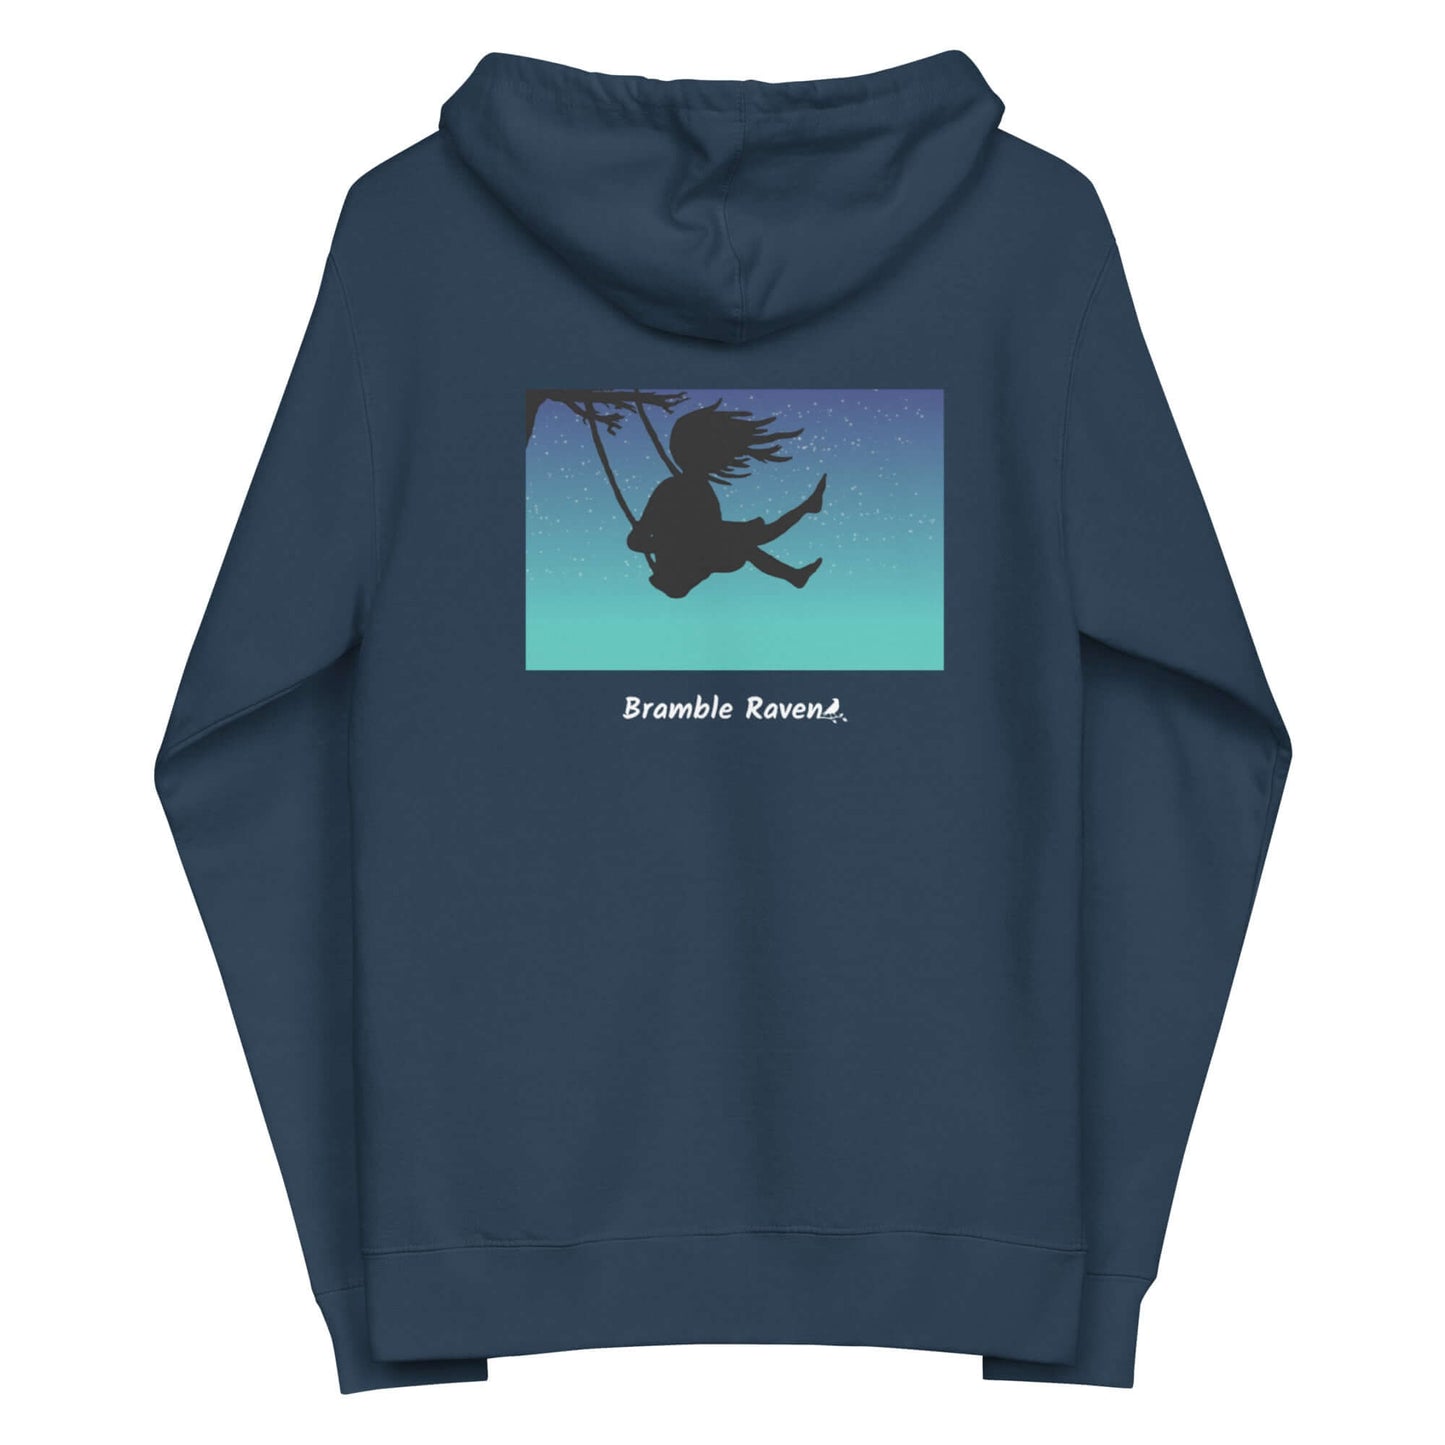 Original Swing Free design of a girl's silhouette in a tree swing against the backdrop of a blue starry sky. Rectangular image on the back of a unisex fleece-lined navy colored zip up hoodie.